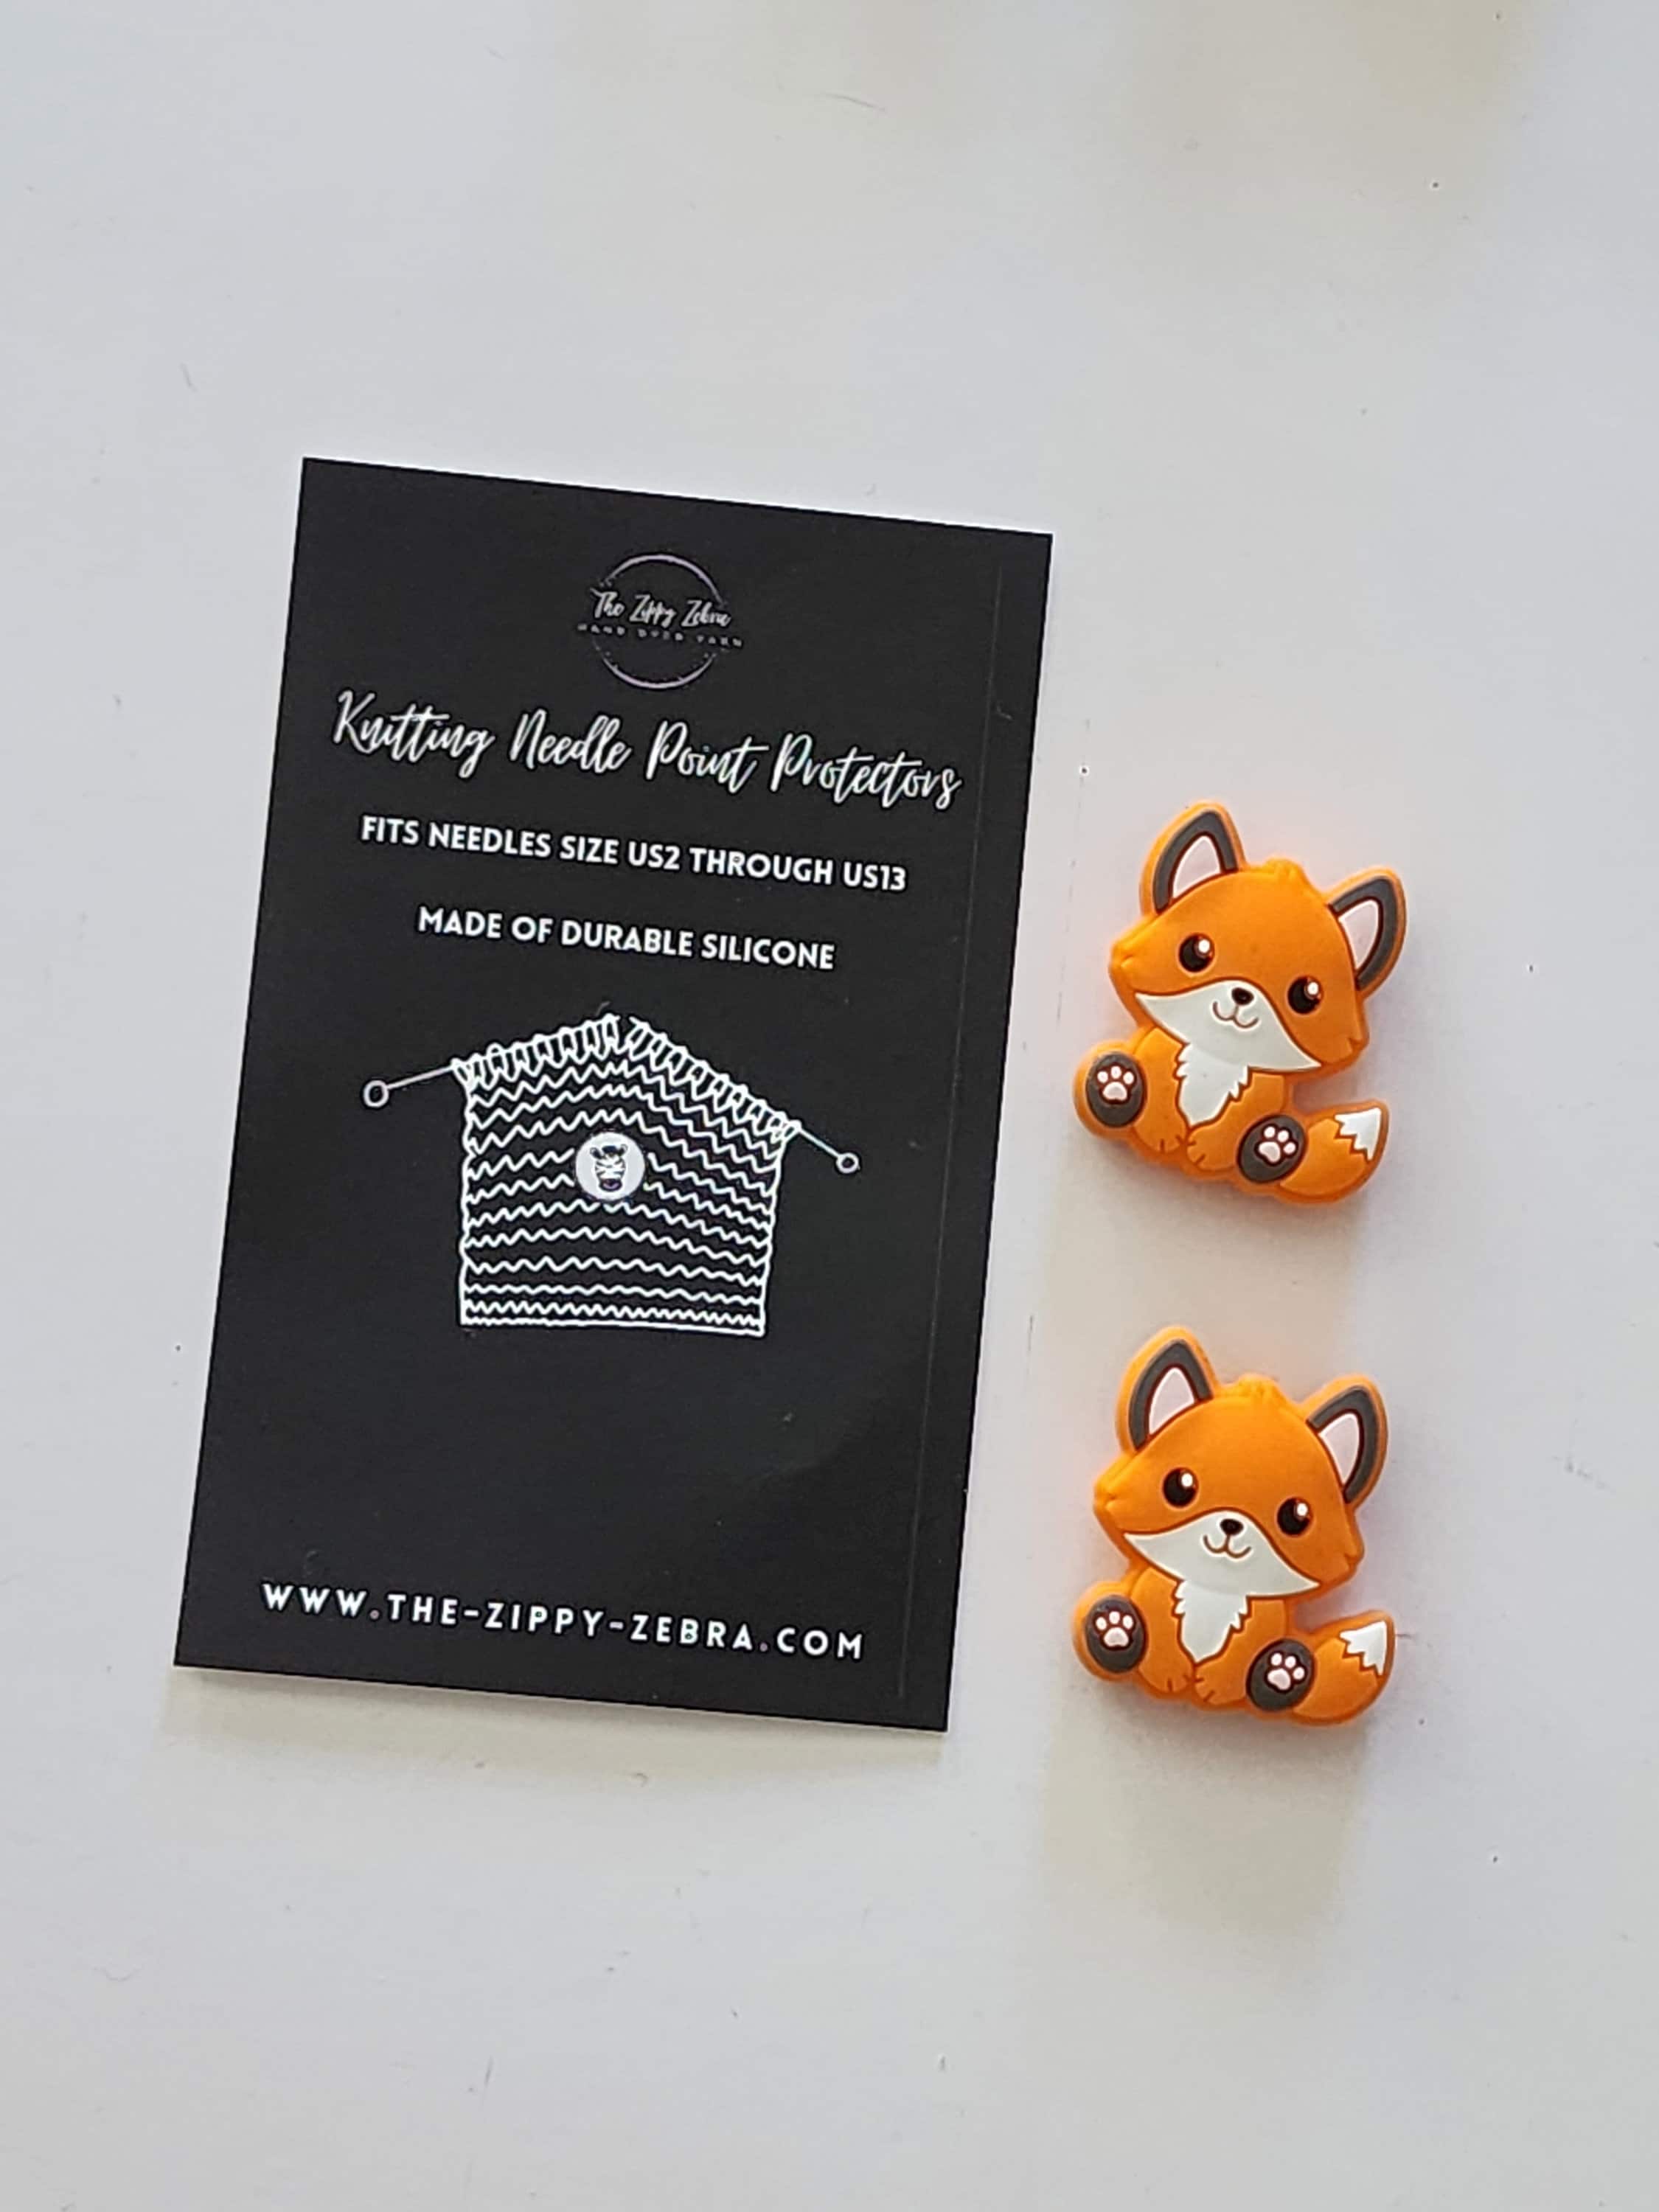 Adorable Knitting Needle Point Protectors Fox